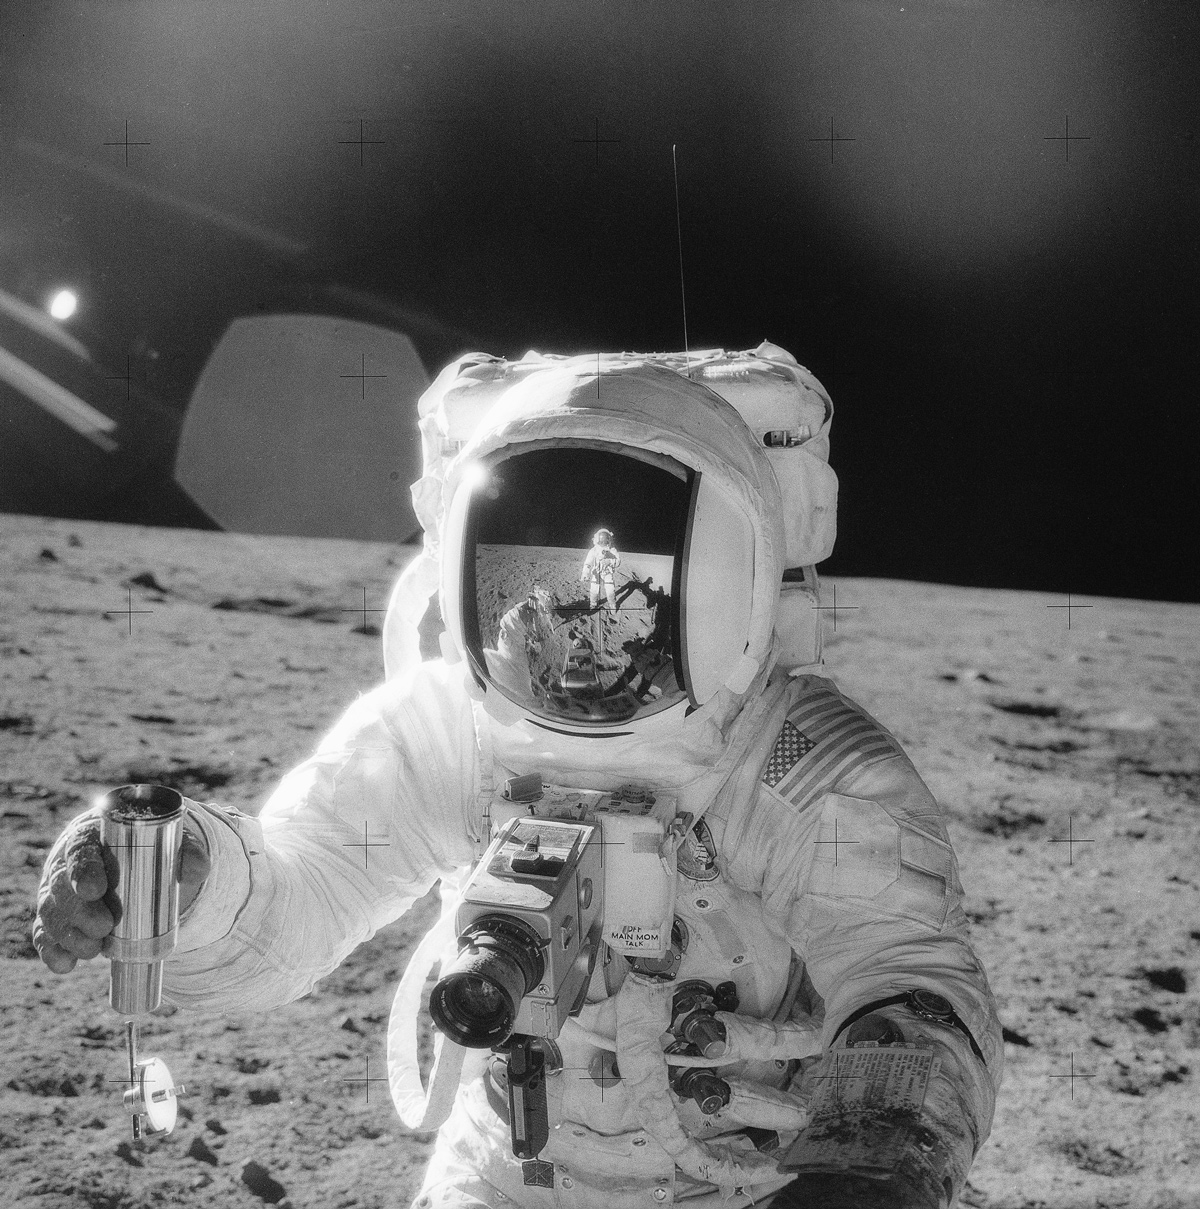 Astronaut collecting rock samples on the moon